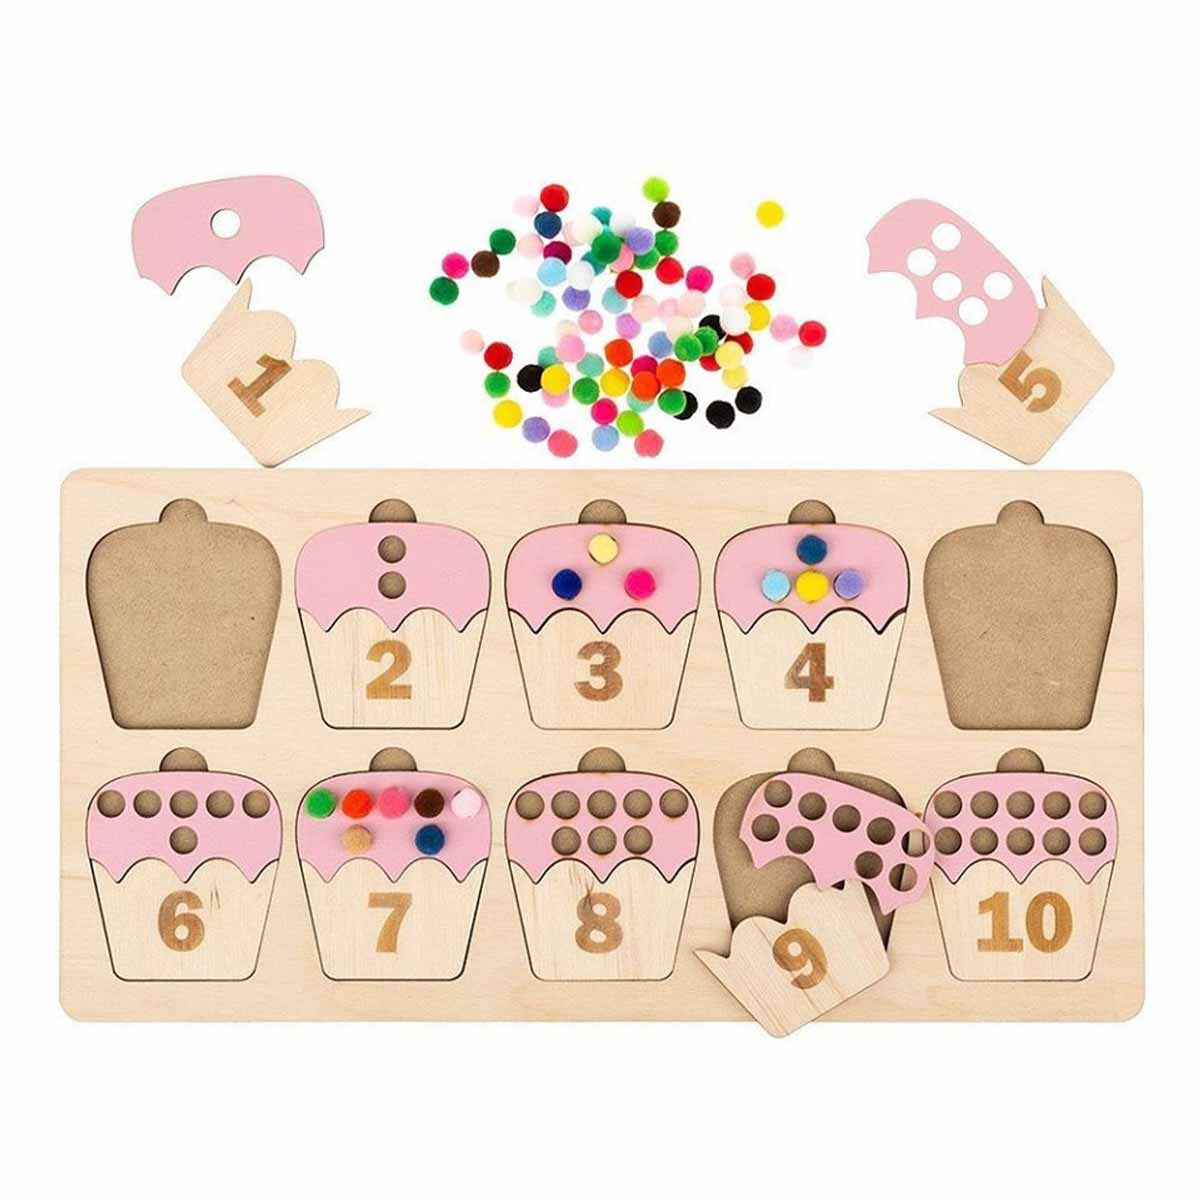 counting game with cupcake puzzle